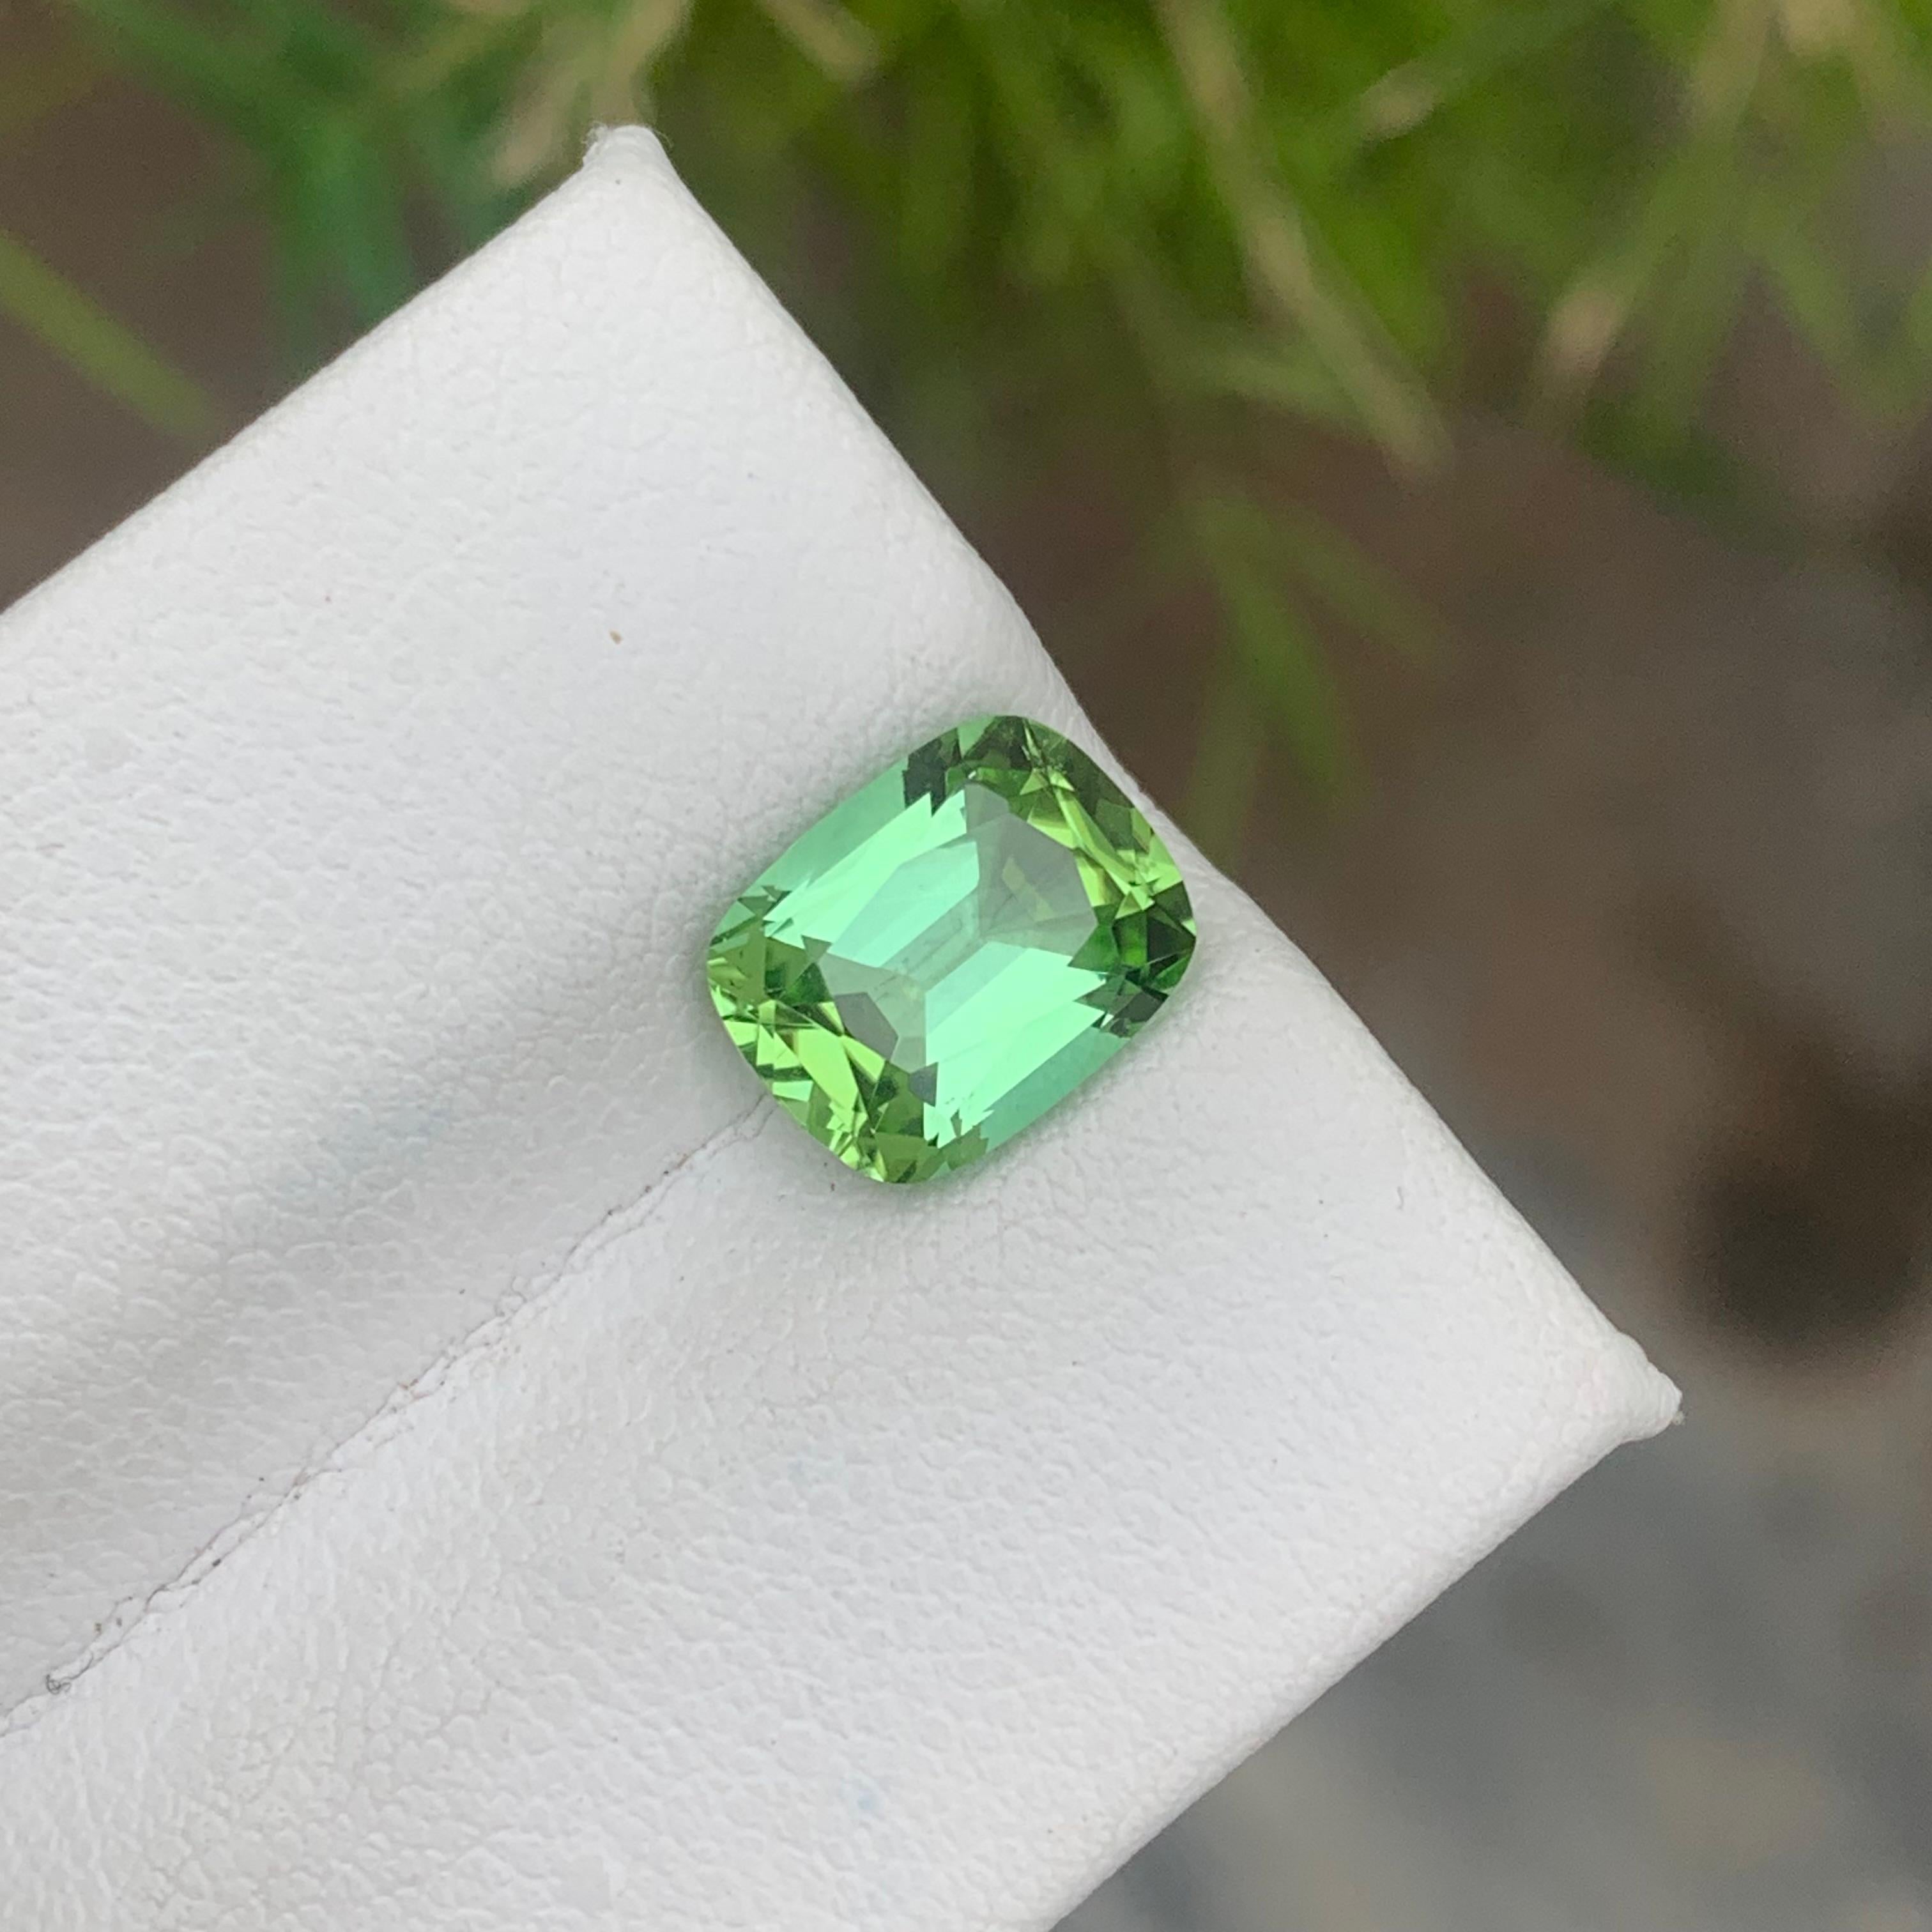 Stunning 2.65 Carat Natural Loose Tourmaline Ring Cushion Cut From Afghanistan For Sale 10